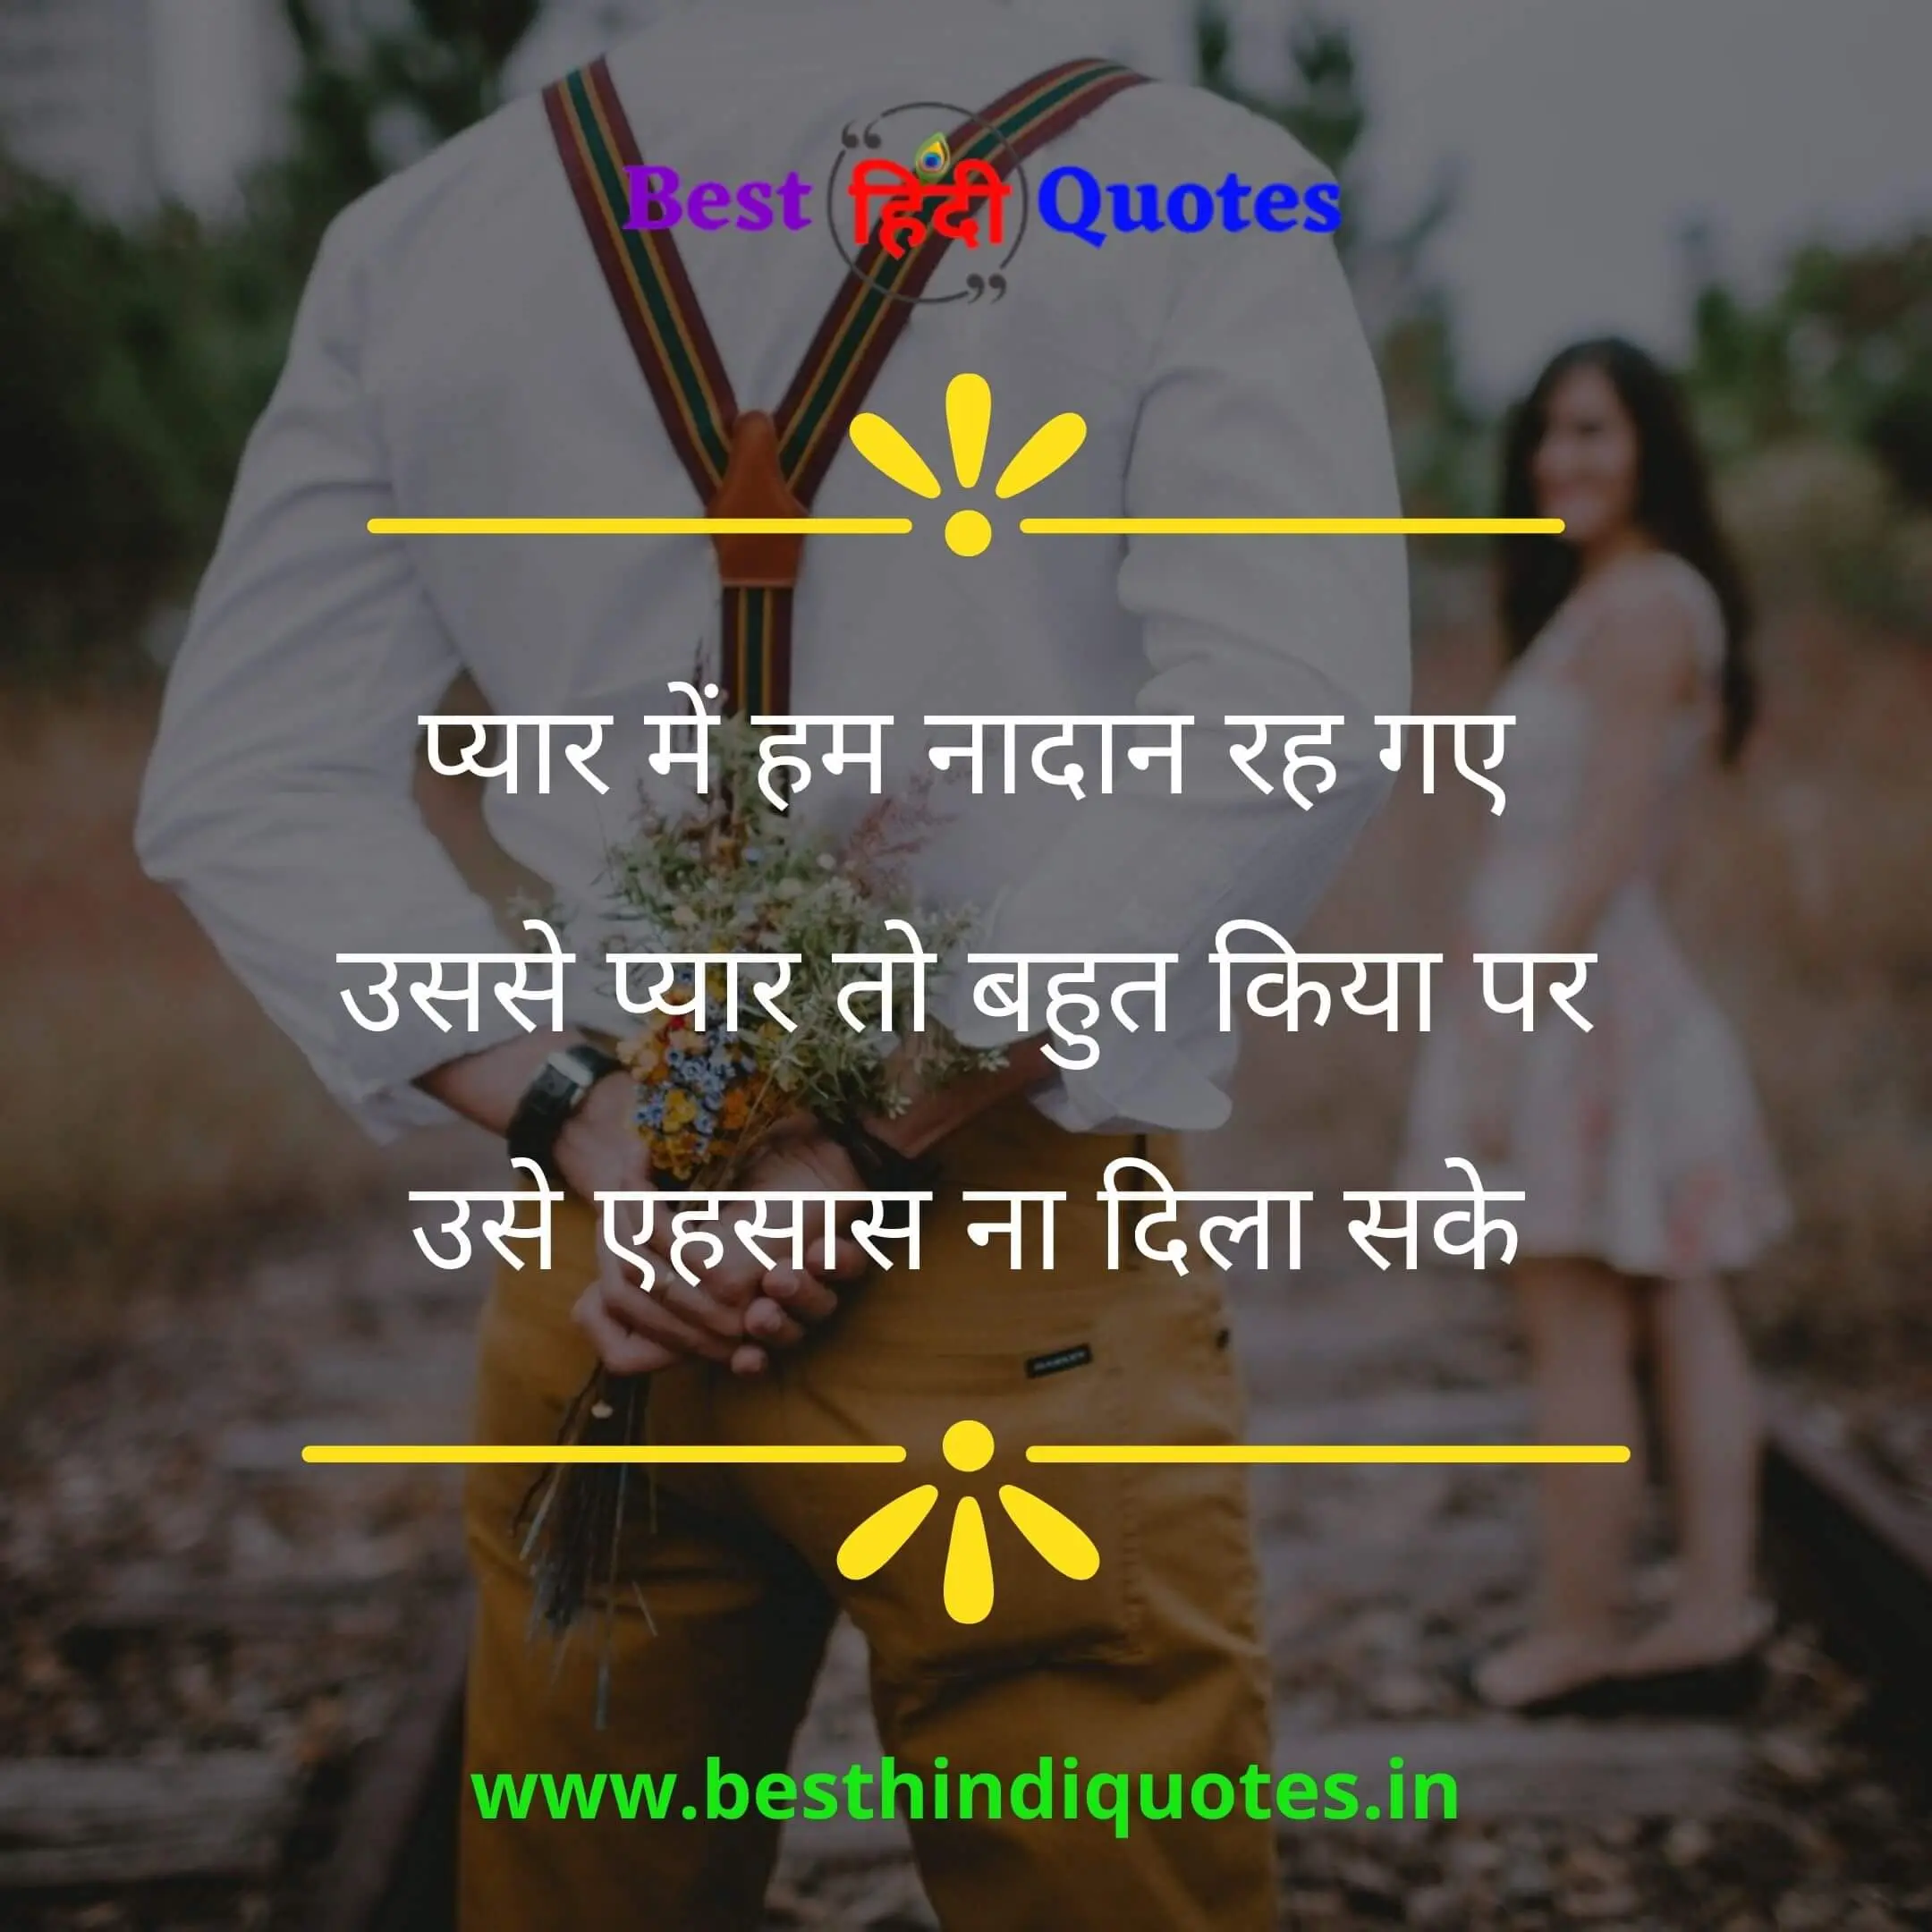 One Sided Love Quotes in Hindi